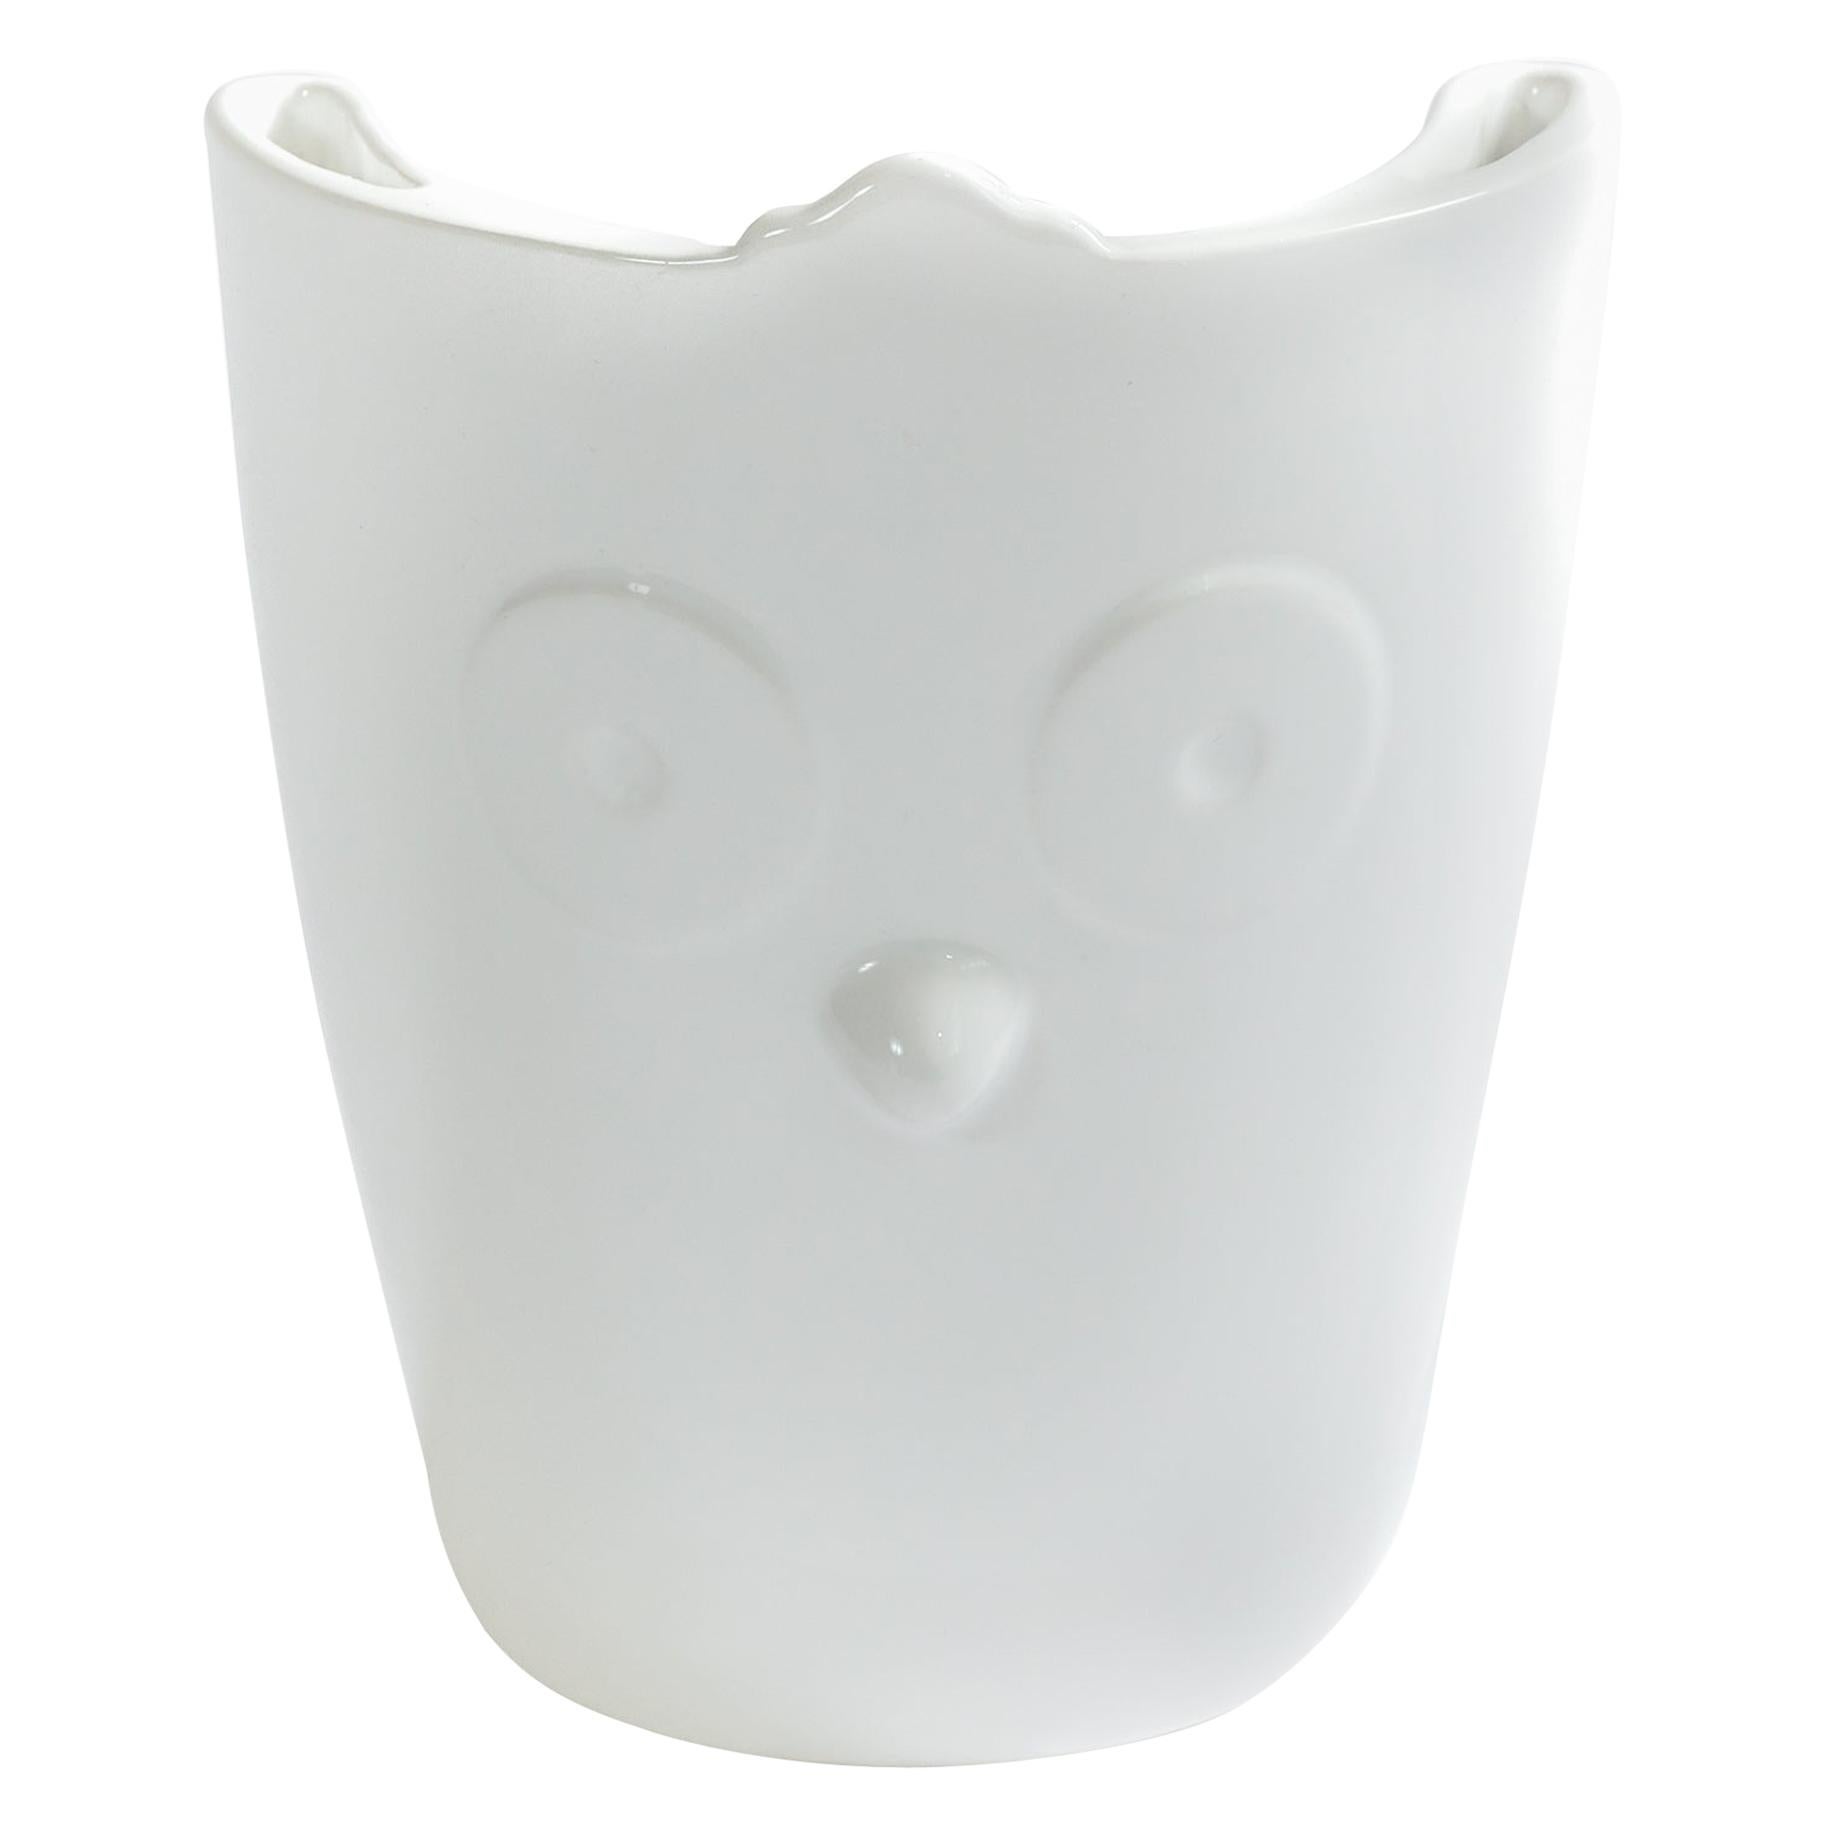 Contemporary vase in white ceramic from the SoShiro Ainu collection